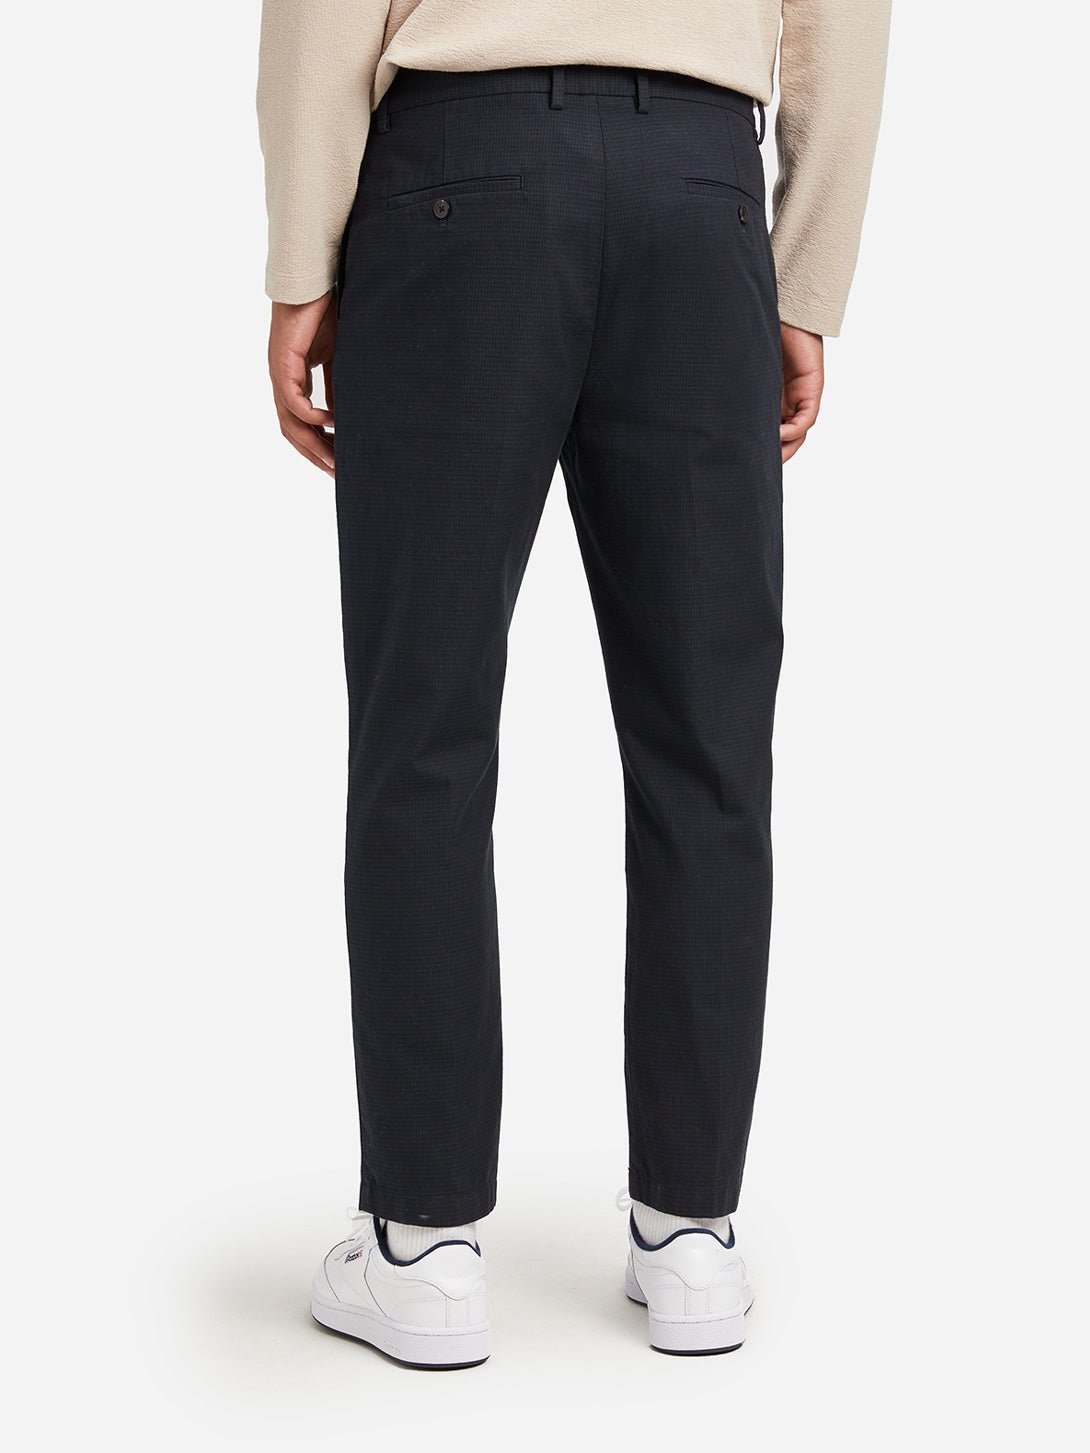 NAVY mens trousers niles trouser ons clothing